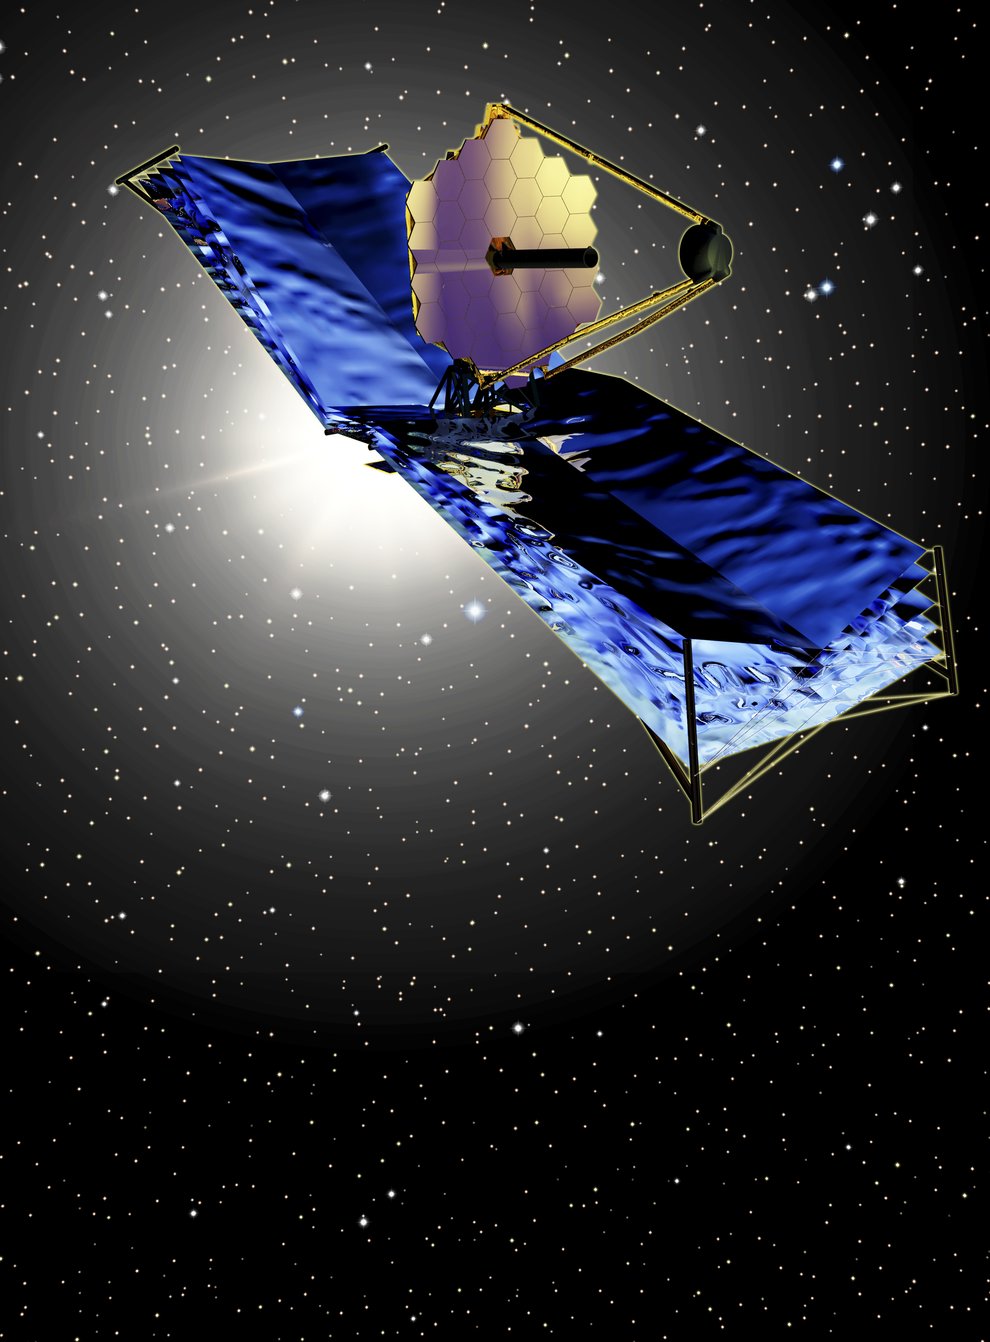 An artist's impression of the James Webb Space Telescope